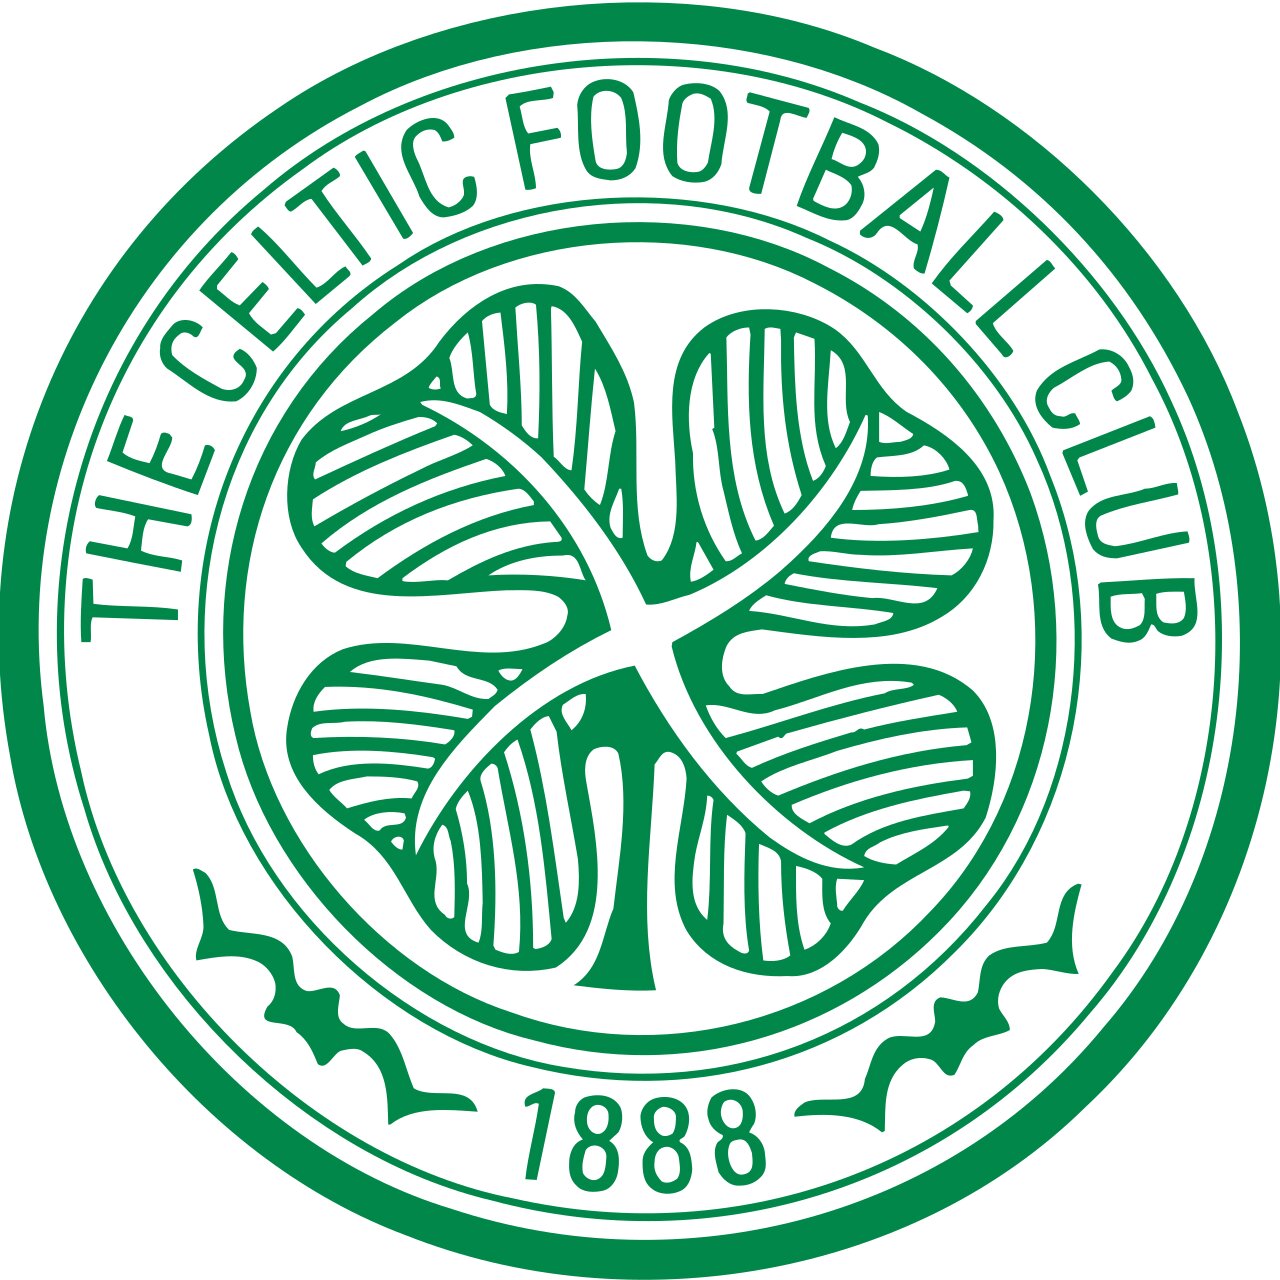 Rest In Peace: Forever In Our Hearts” Celtic winger Confirm Death” He Dies Menter Issue….